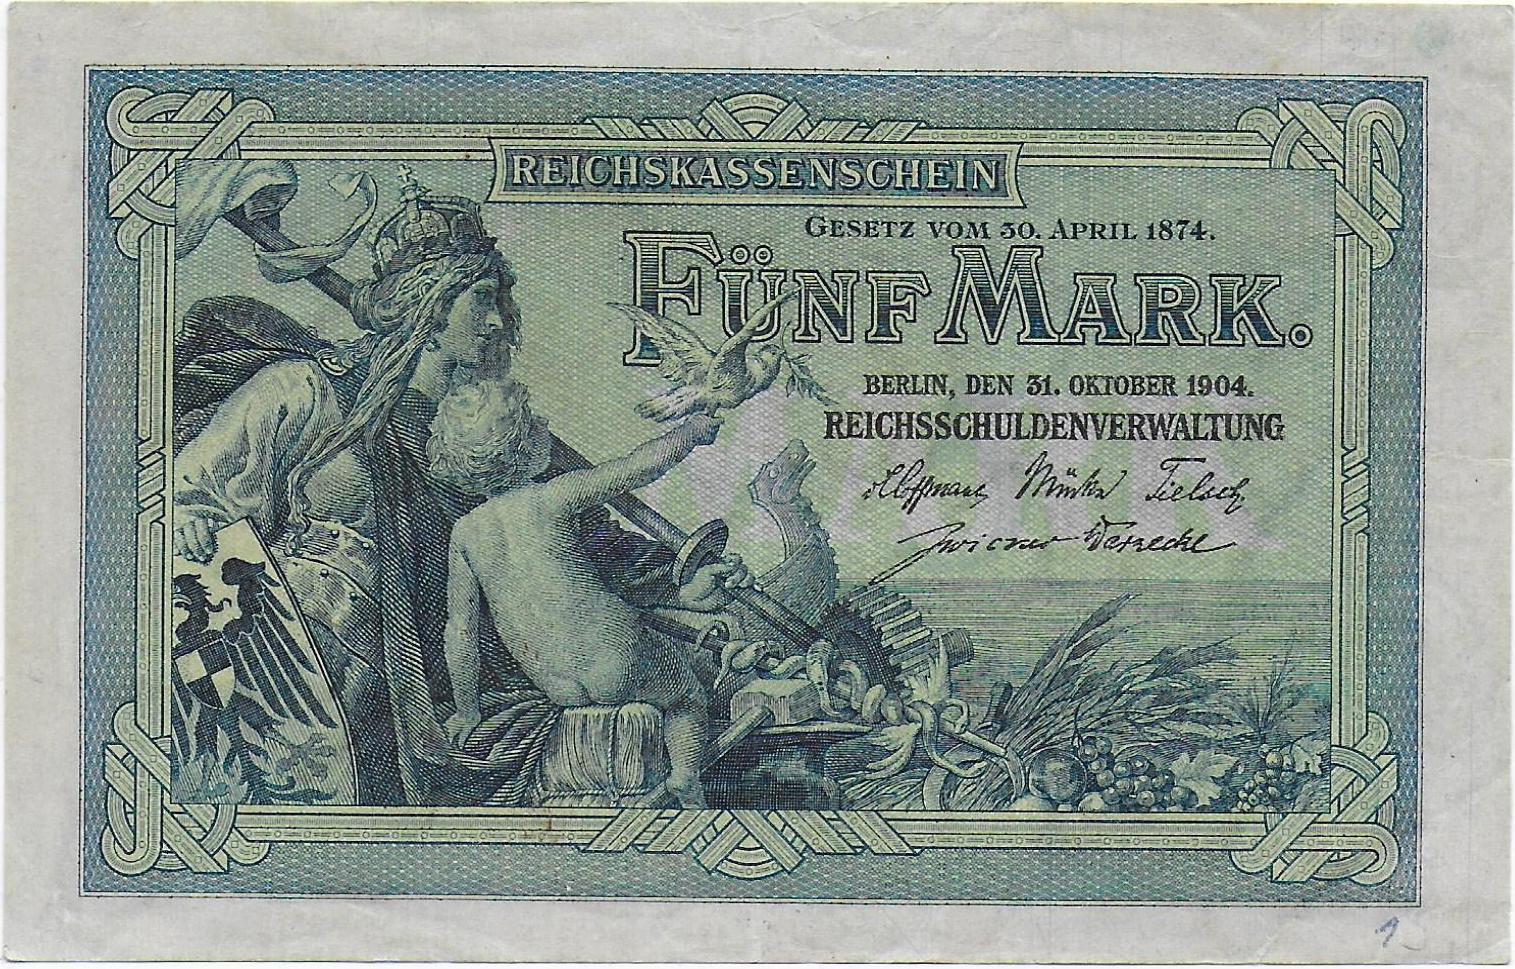 Germany 5 Mark later ser no 1904 front.jpg